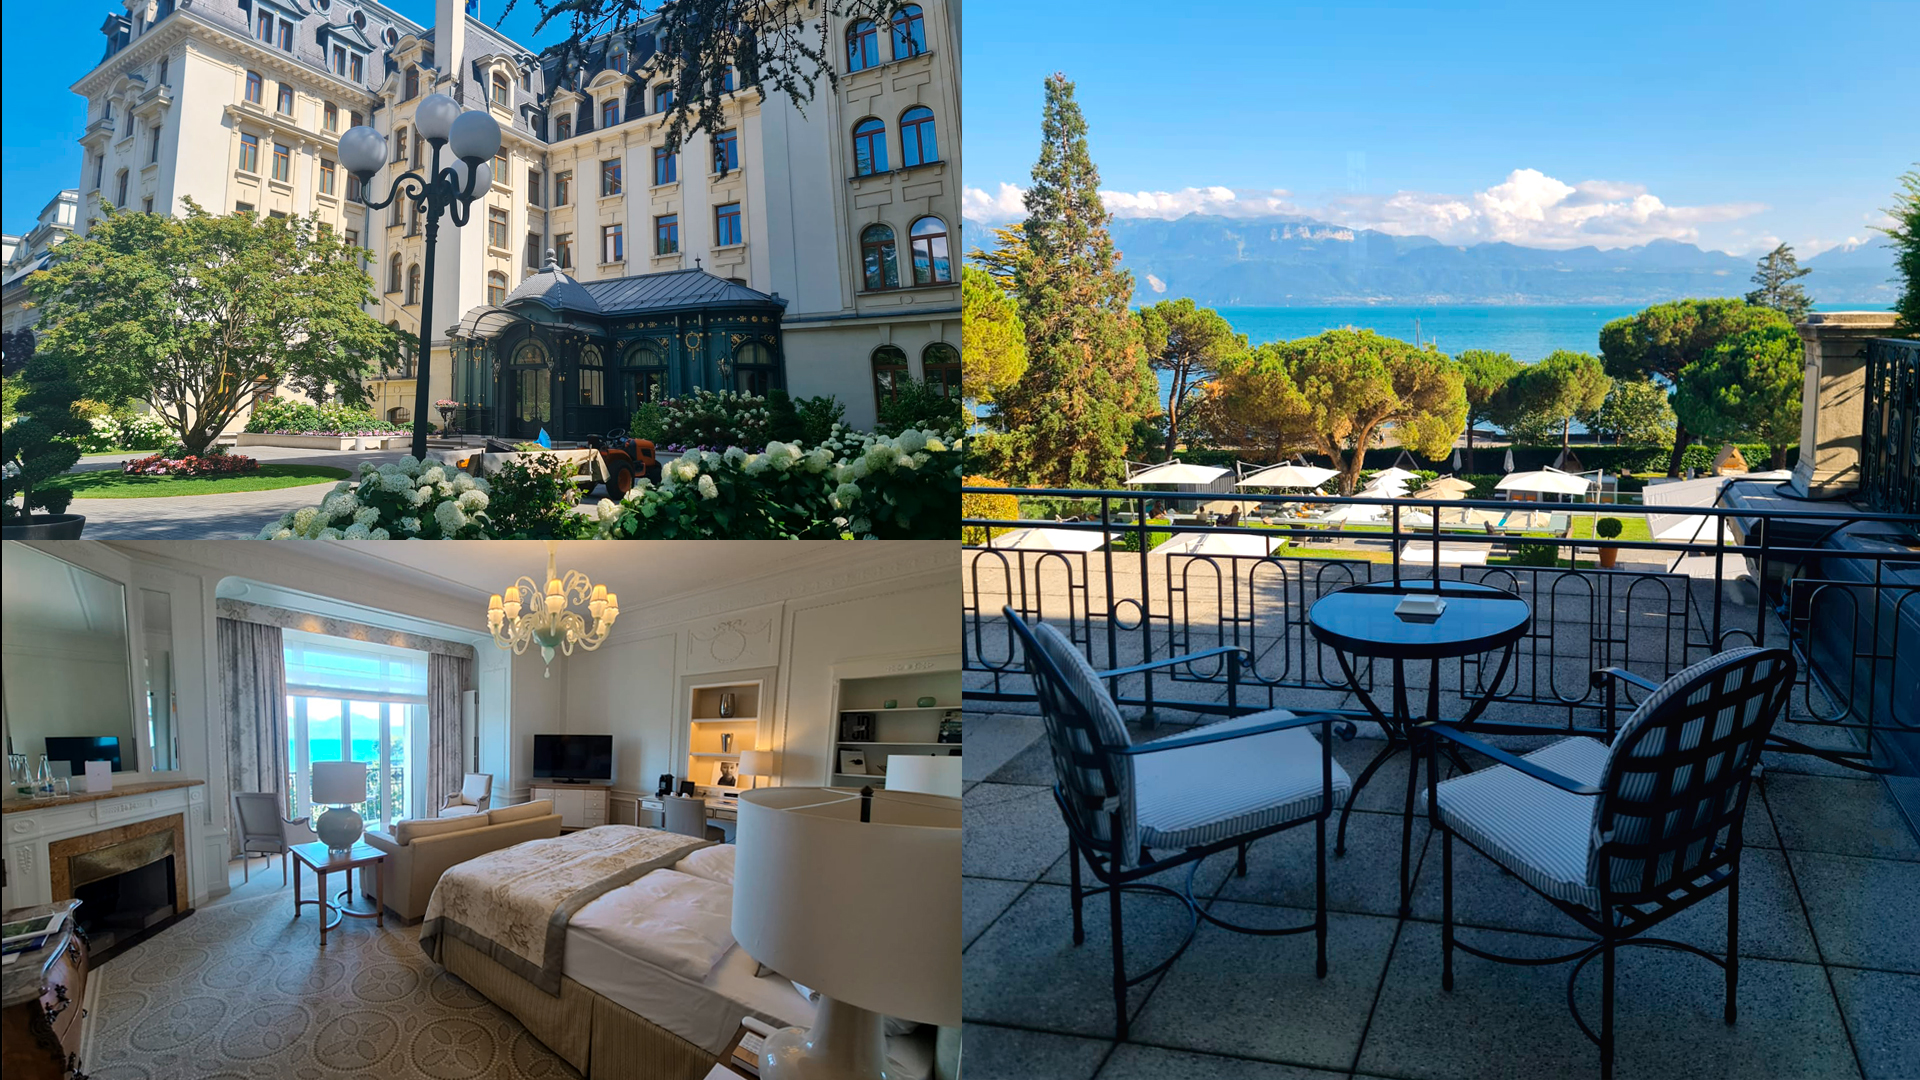 The Beau Rivage Palace is a luxurious hotel situated on the banks of Lake Leman in Lausanne, Switzerland.